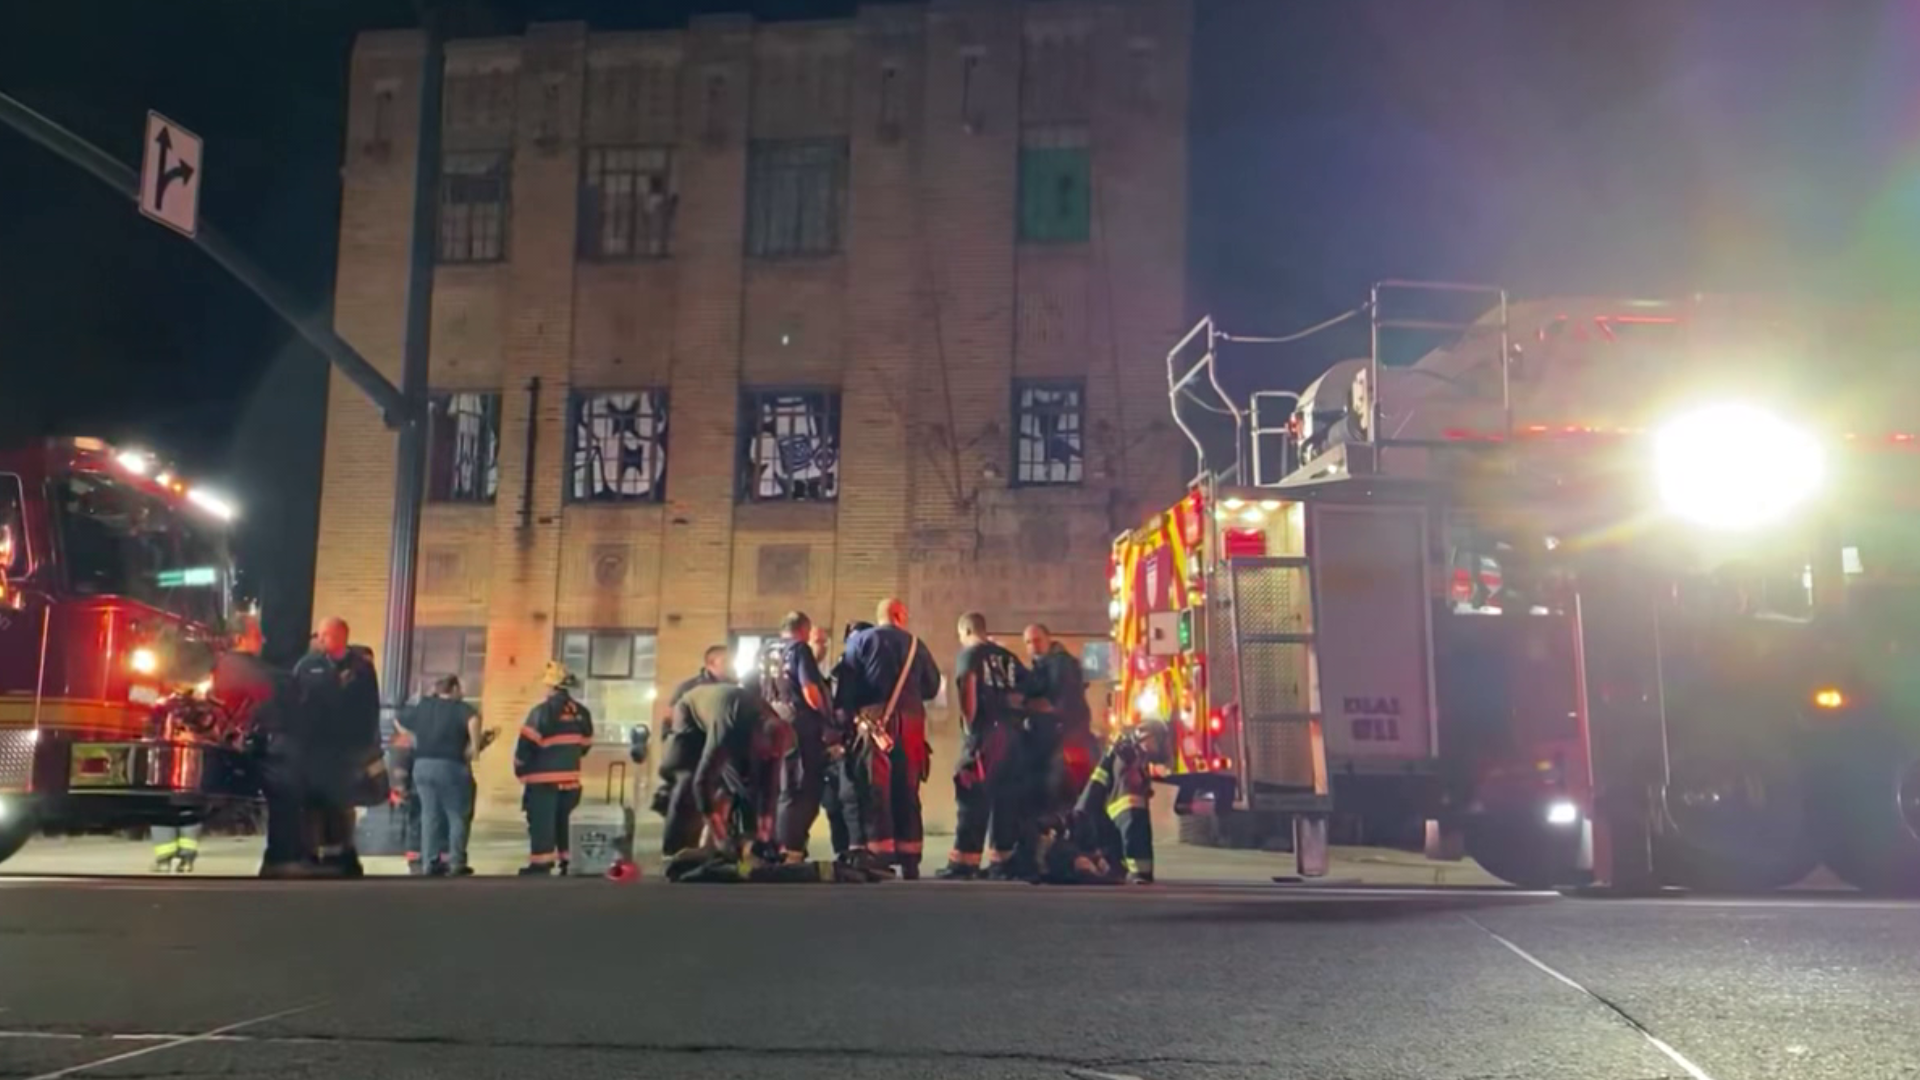 Flames broke out at the abandoned building just after 9:30 p.m.